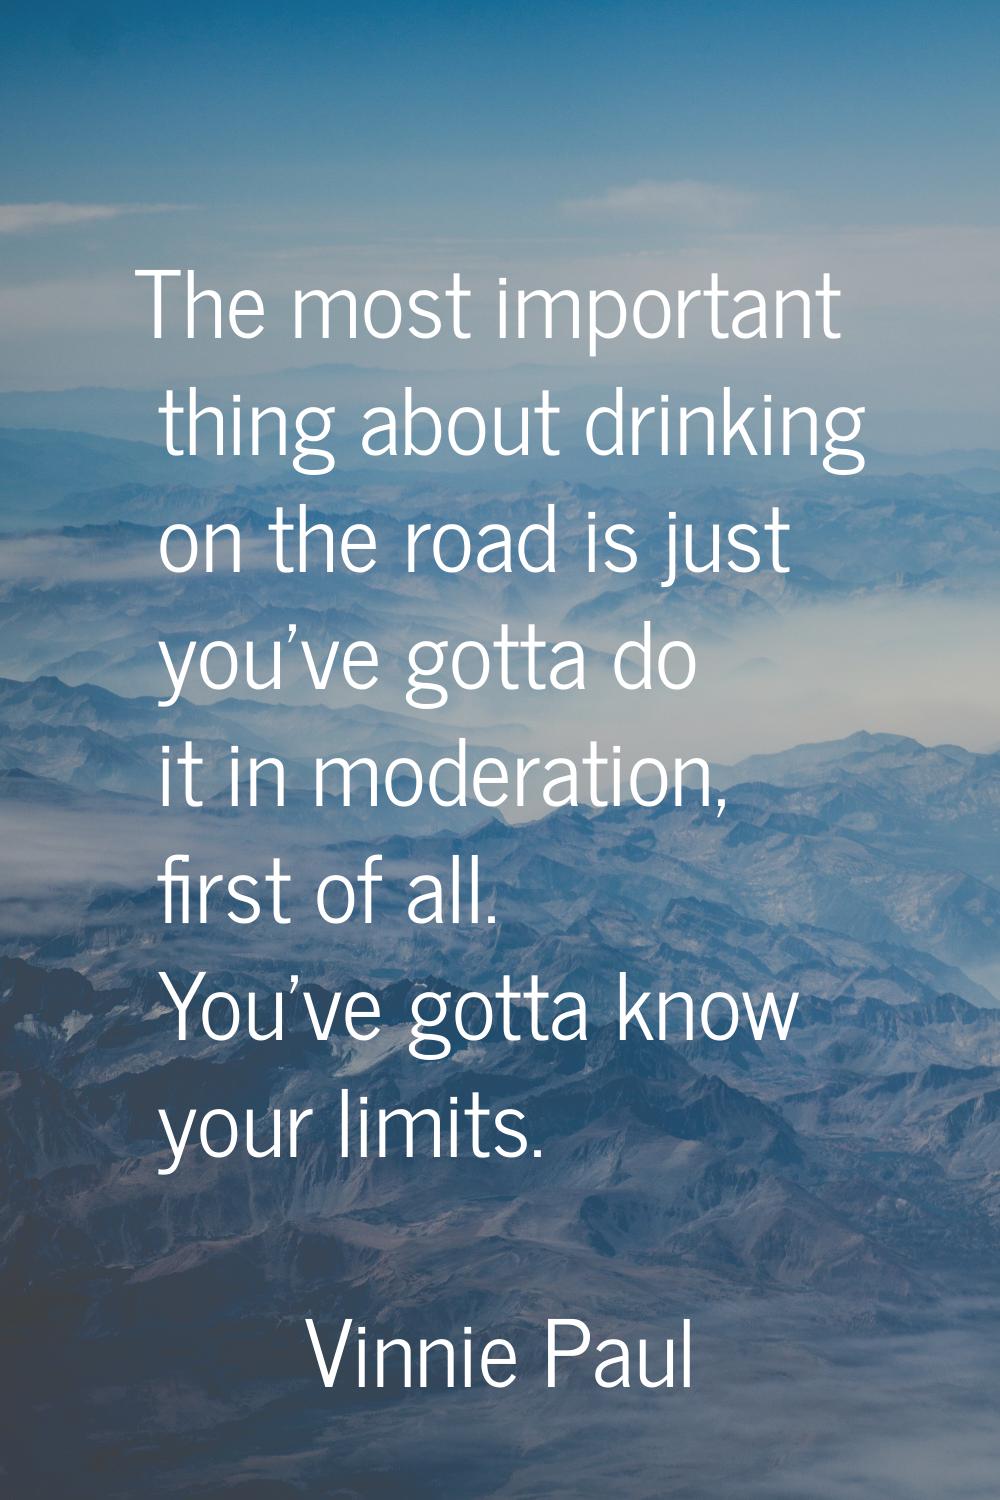 The most important thing about drinking on the road is just you've gotta do it in moderation, first